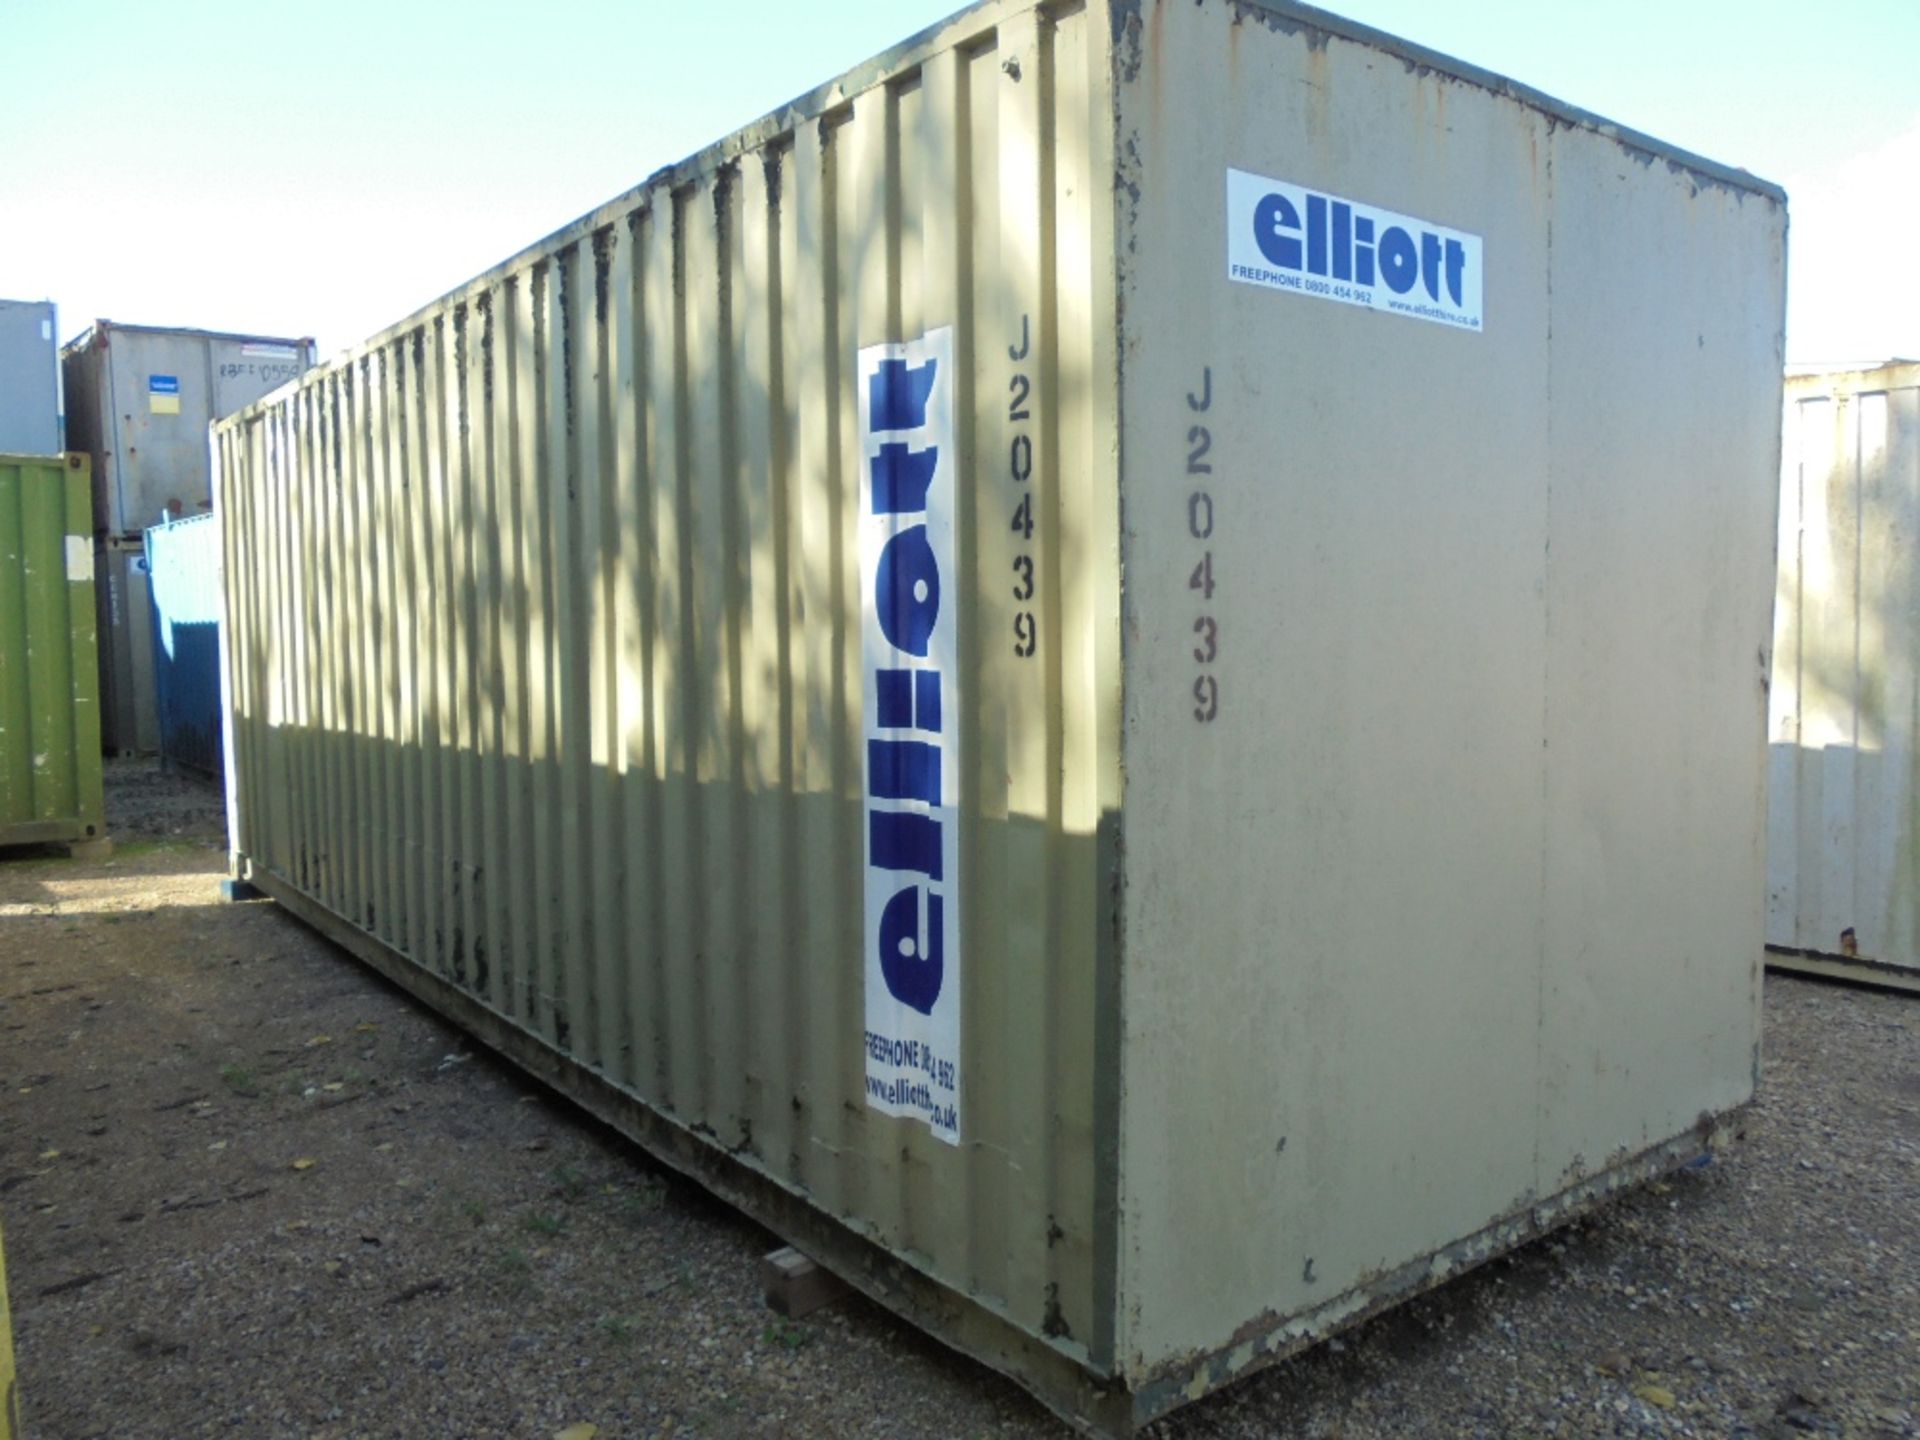 J20439 24ft x 8ft Secure Container - Image 2 of 5